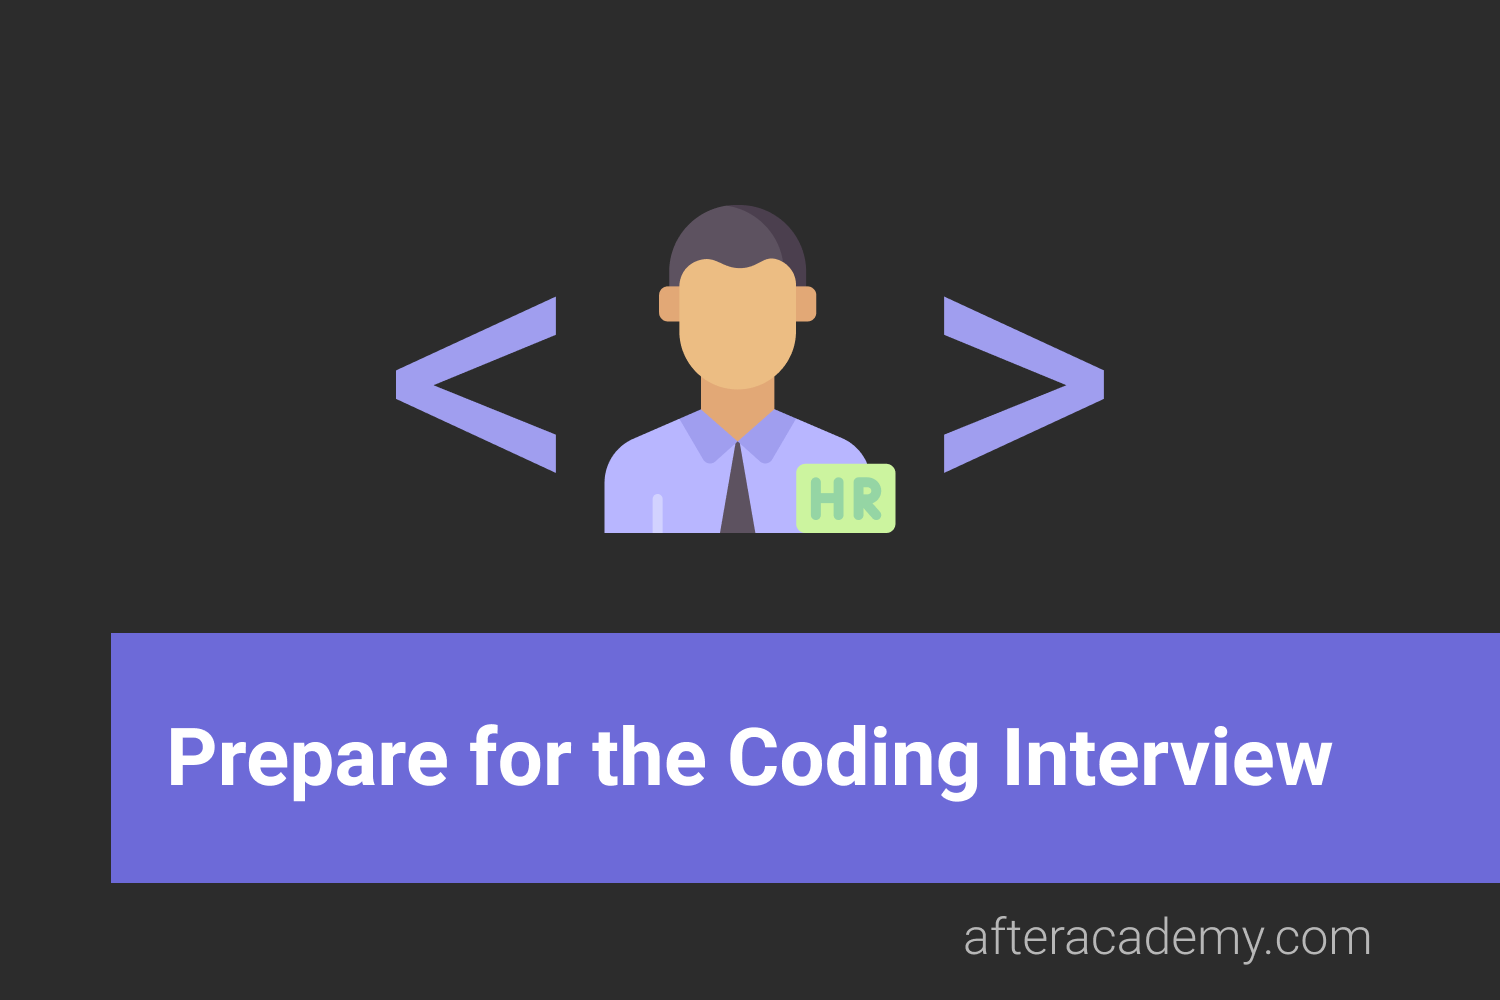 How to prepare for the Coding Interview?